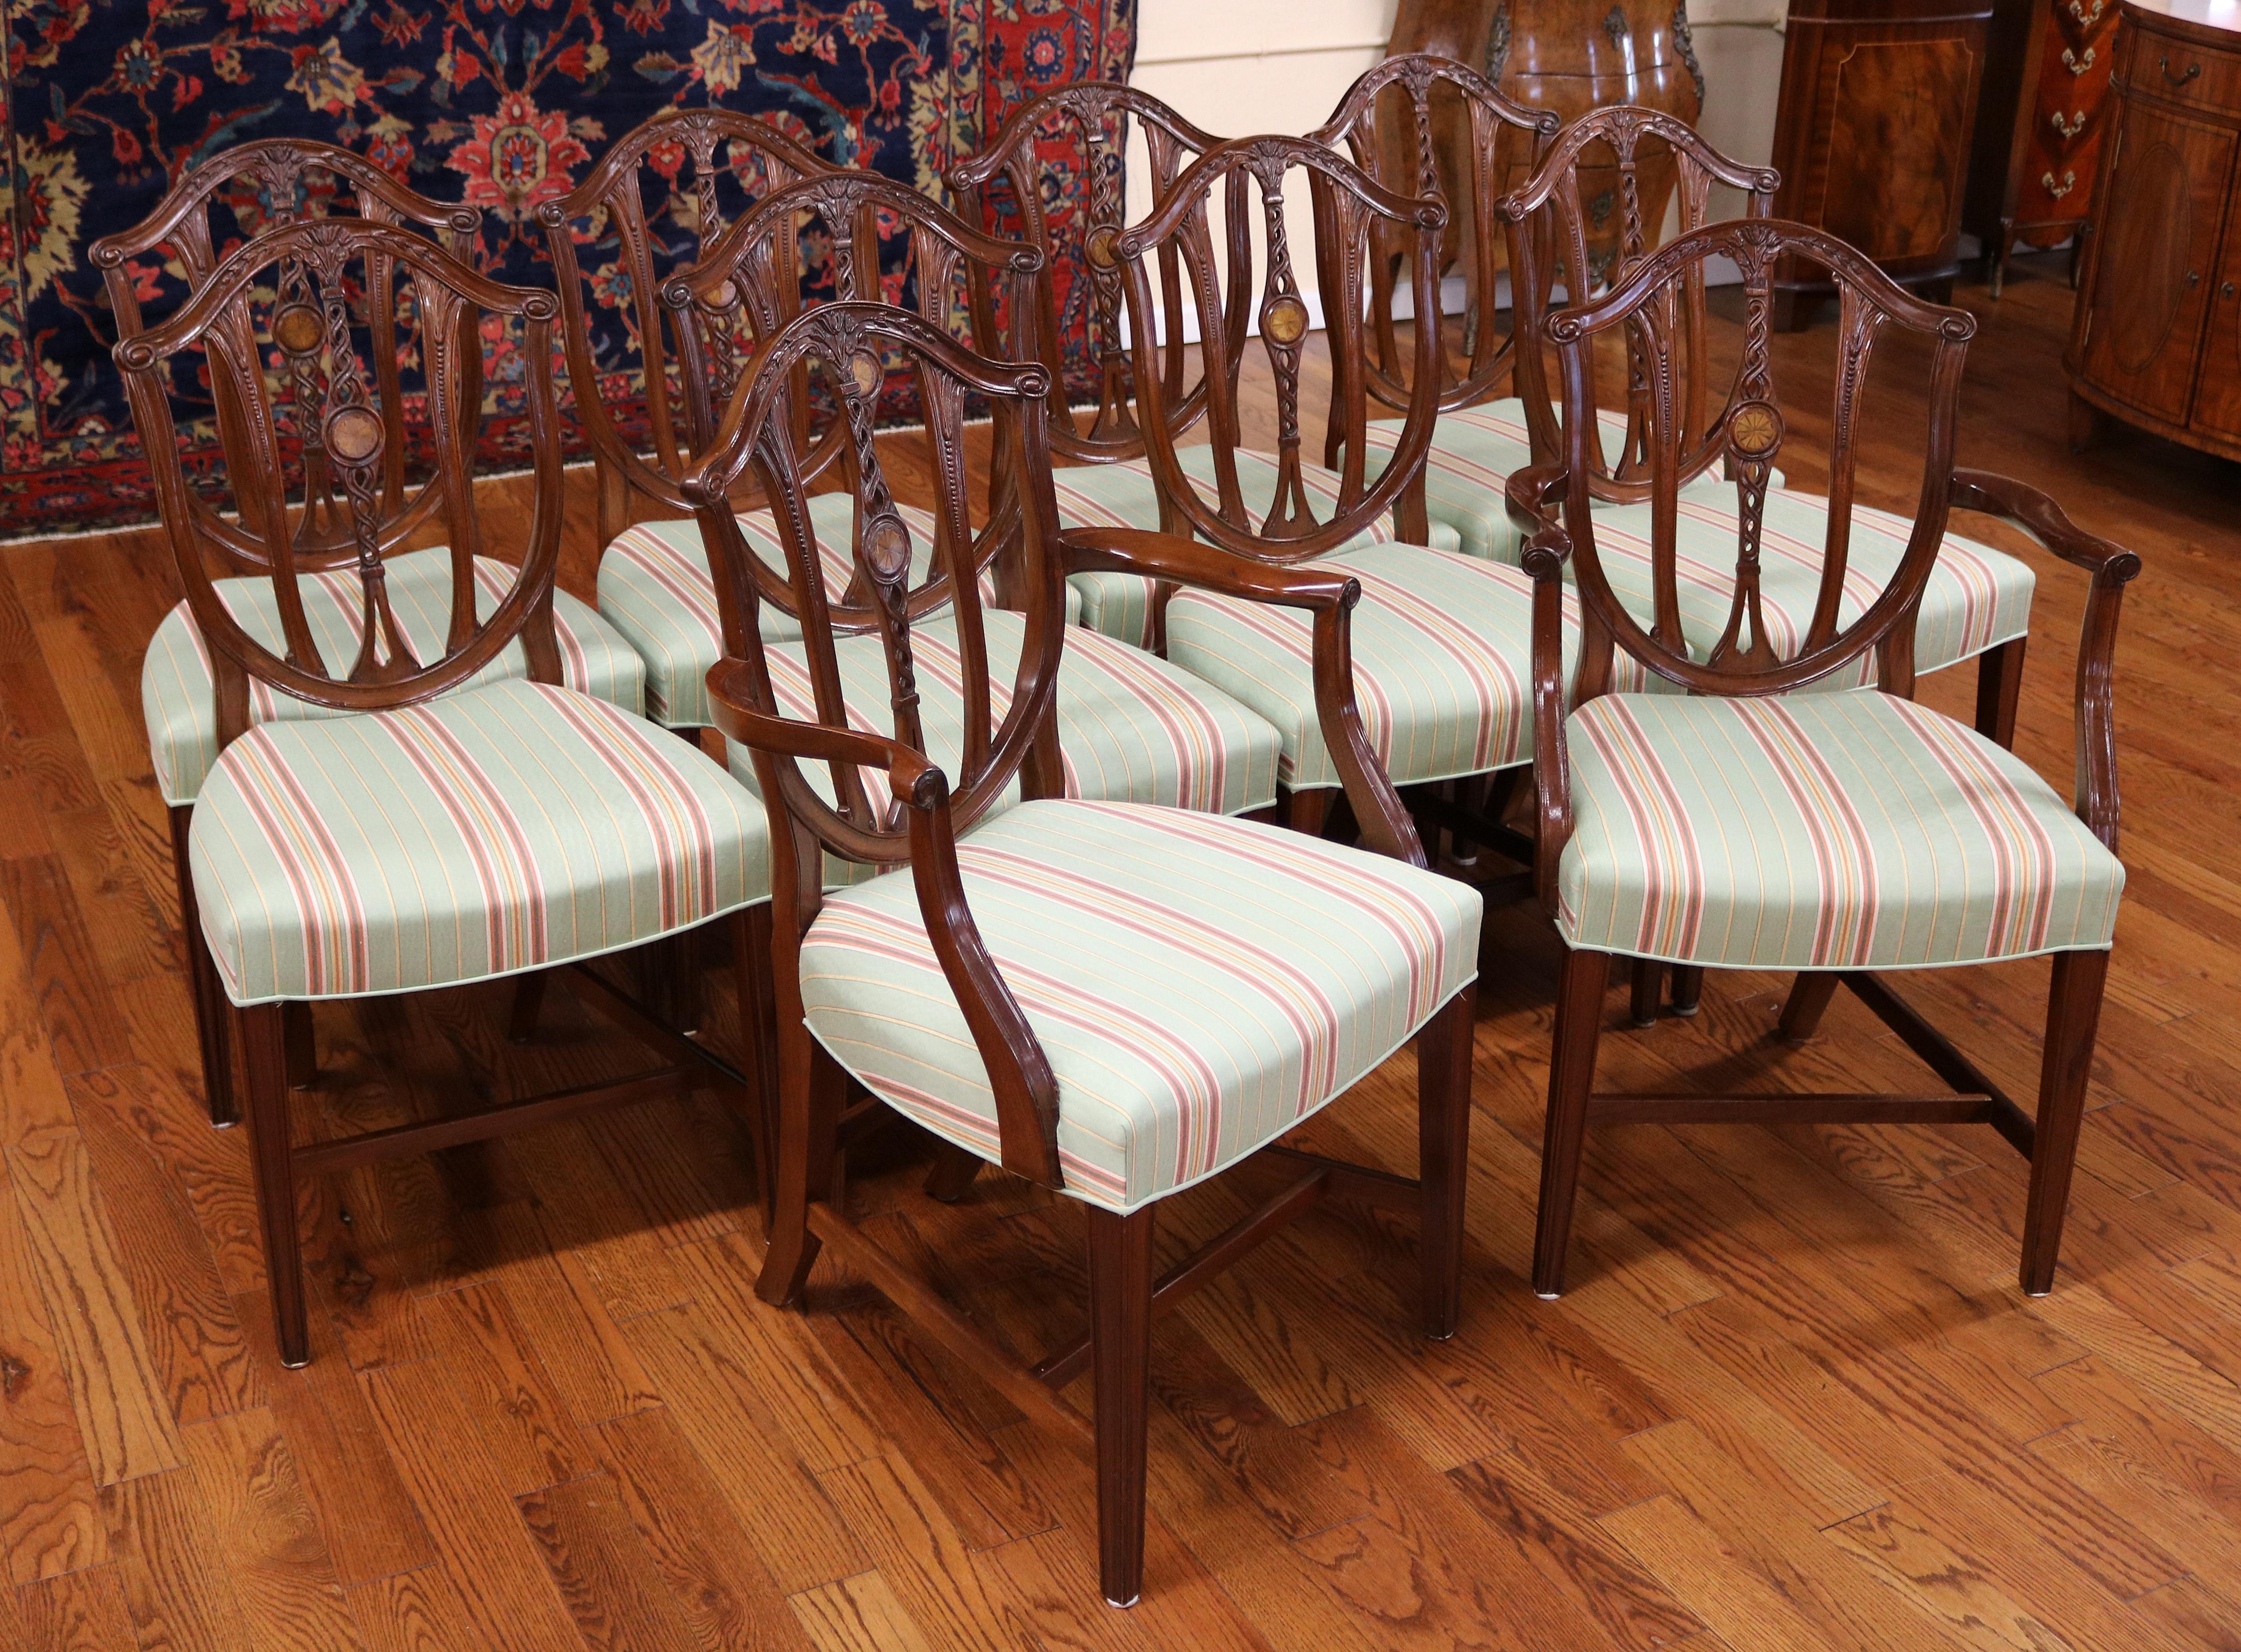 ​Set of 10 Early 20th Century Mahogany Baltimore Hepplewhite Dining Chairs

Dimensions : Side - 37.5